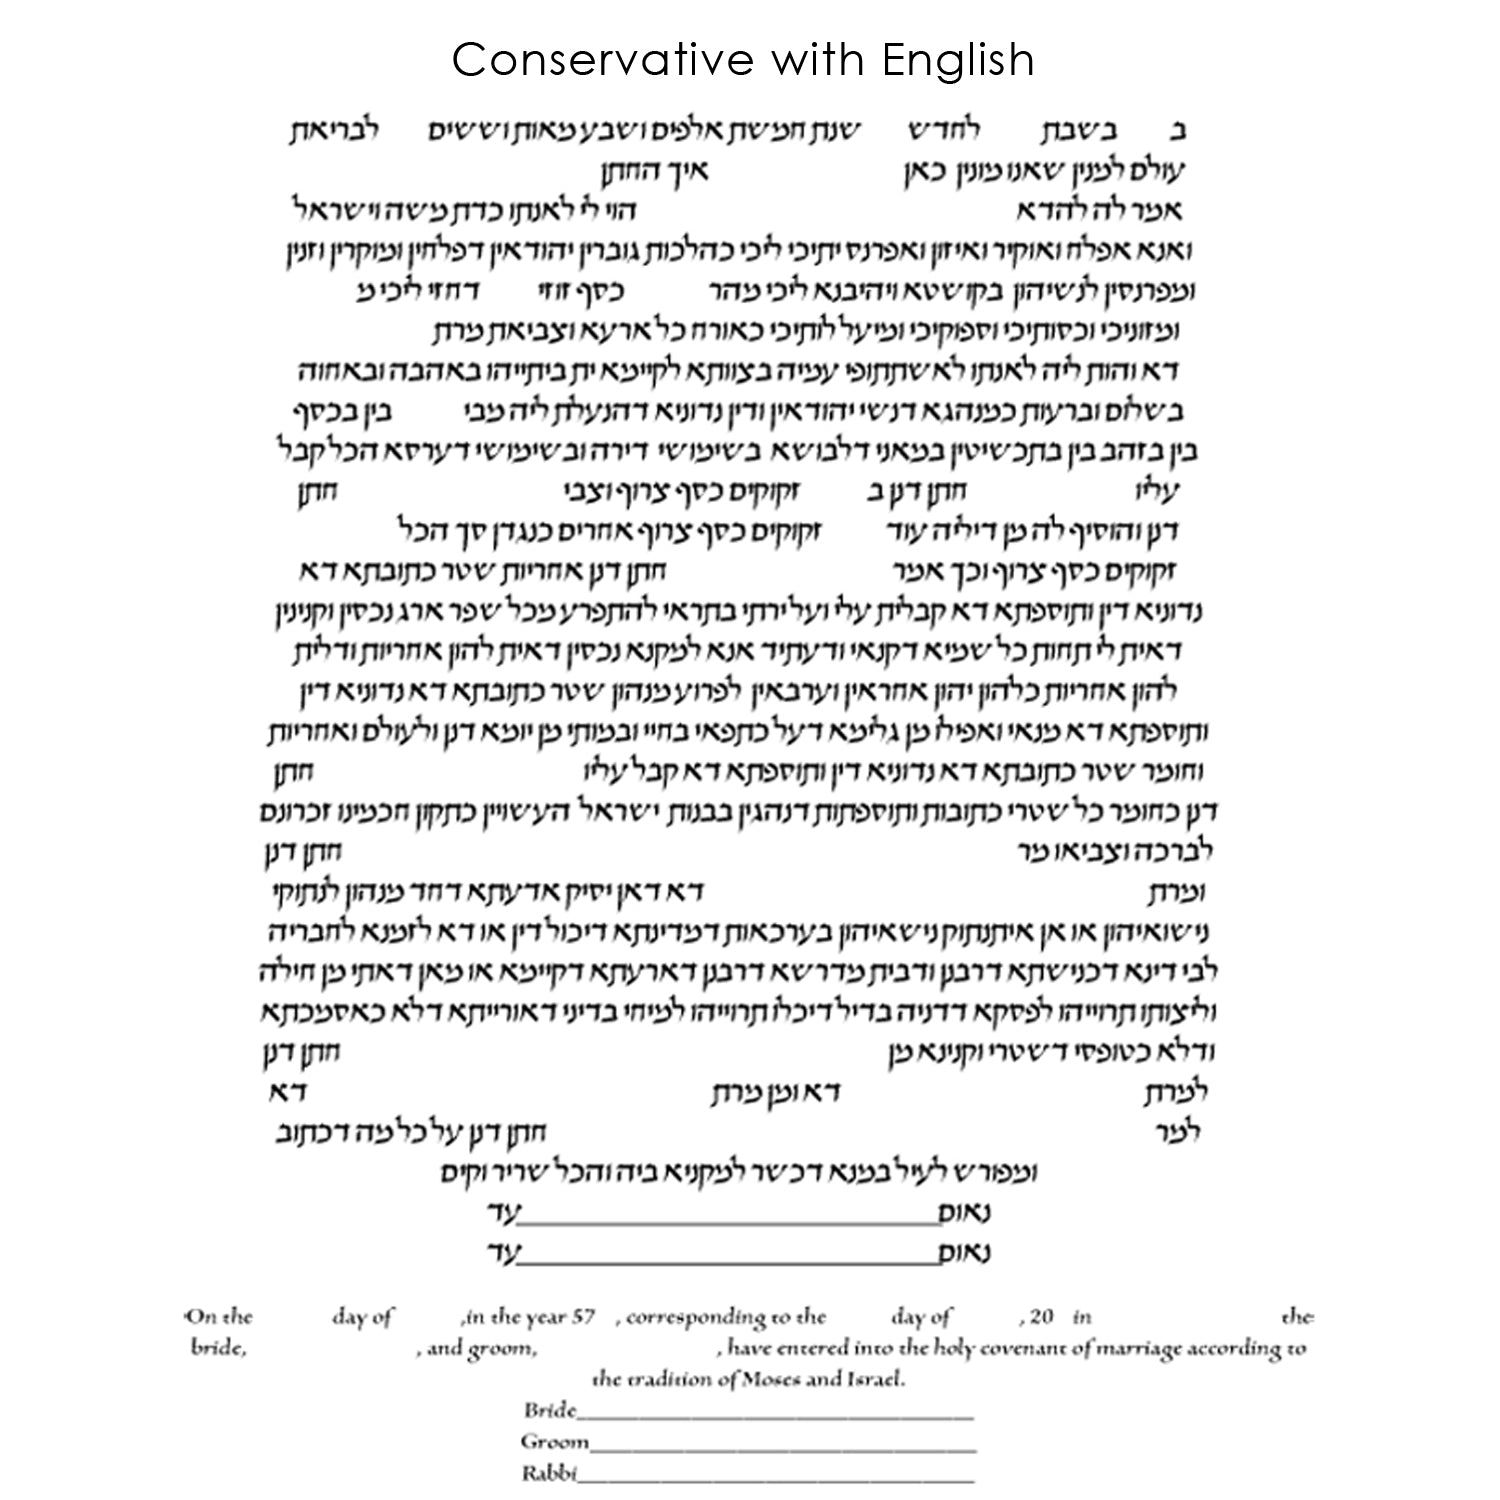 Chris Cozen - Conservative with English Text